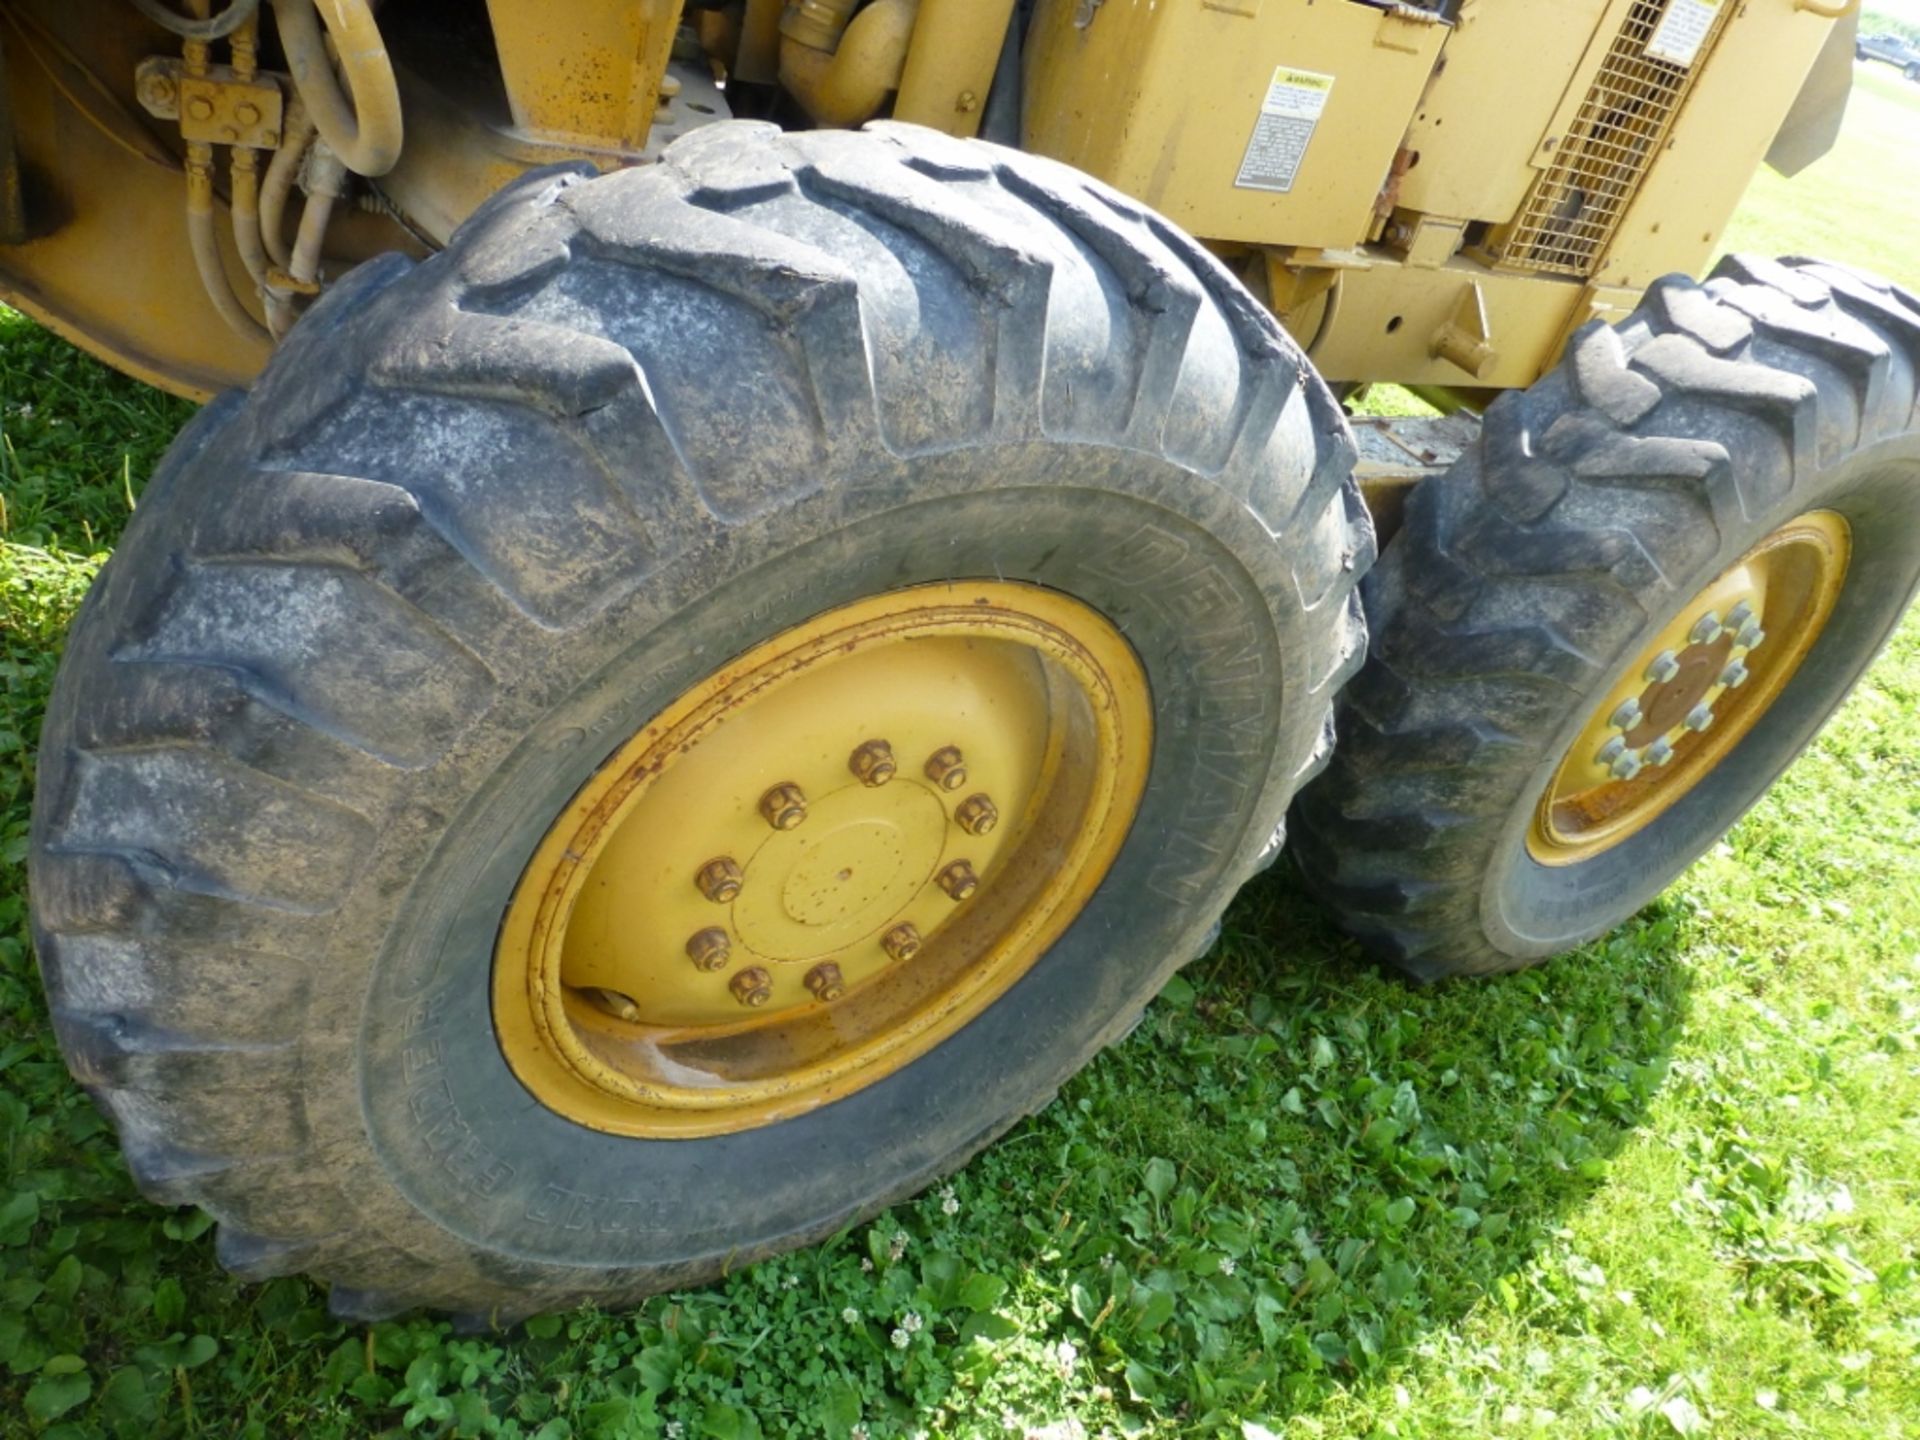 Caterpillar 120G motor grader with 13'10" moldboard se:87v871. Power shift. 7720 unverified hrs. - Image 22 of 27